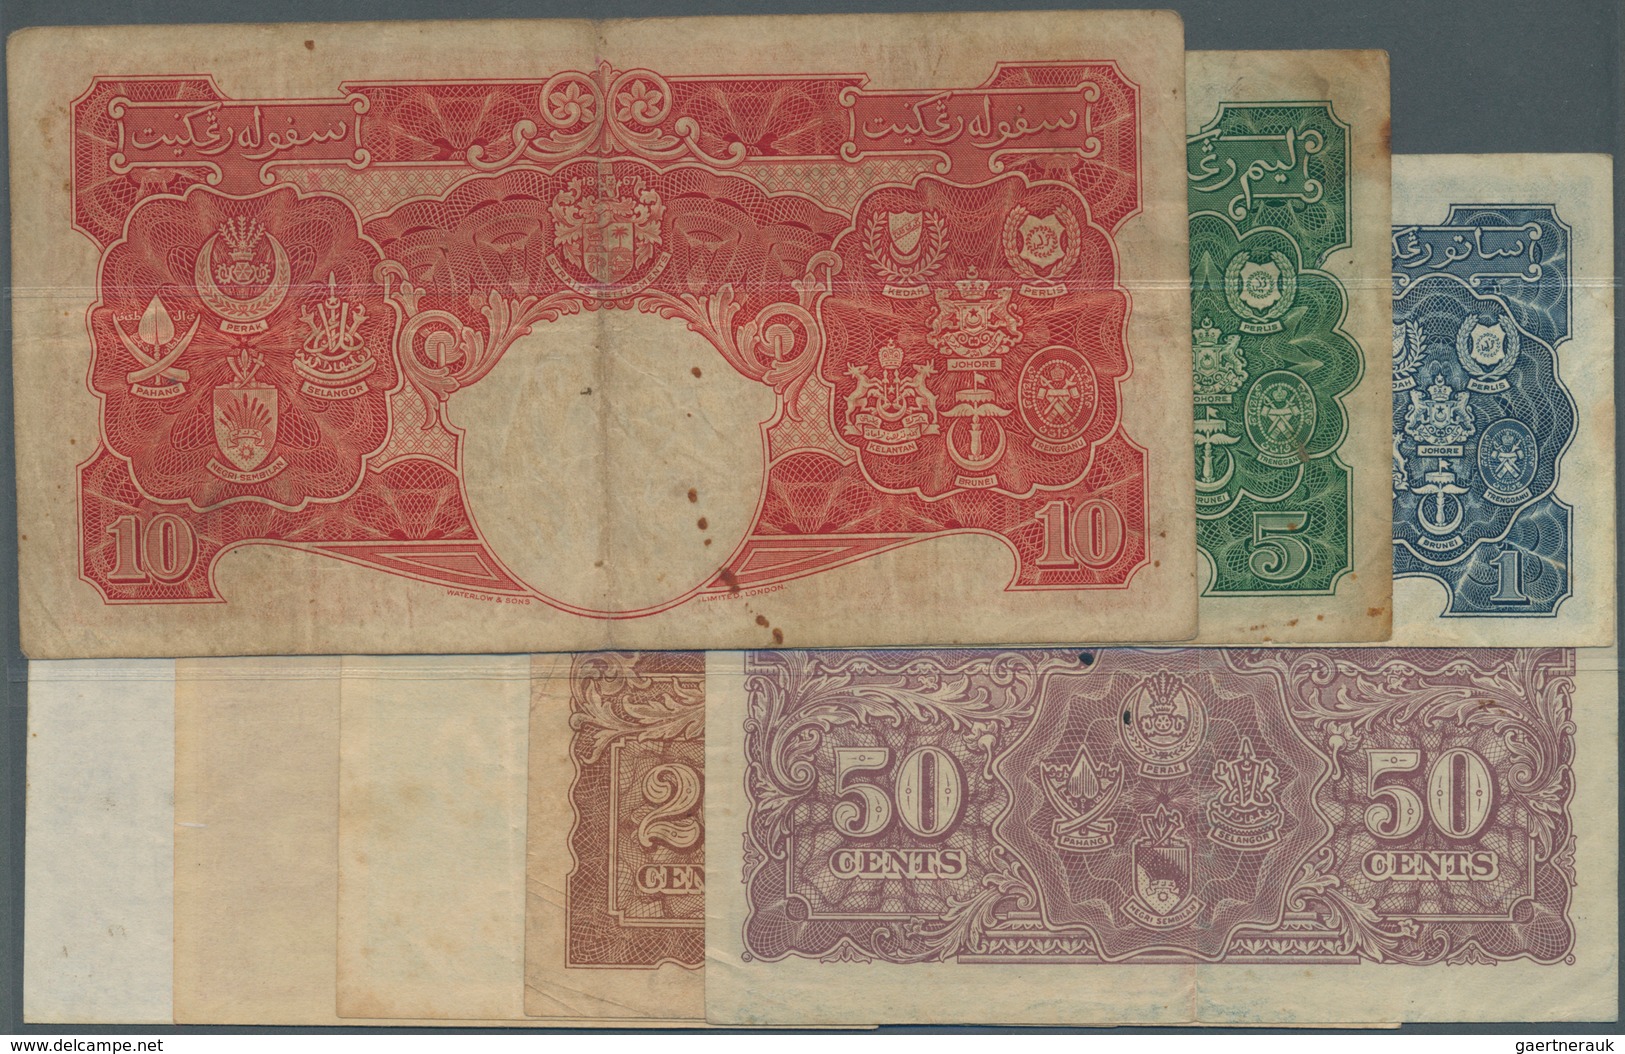 01977 Malaya: Set Of 8 Notes Containing 1, 5, 10, 20 And 50 Cents 1941 And 1, 5 And 10 Dollars 1941 P. 6-1 - Maleisië